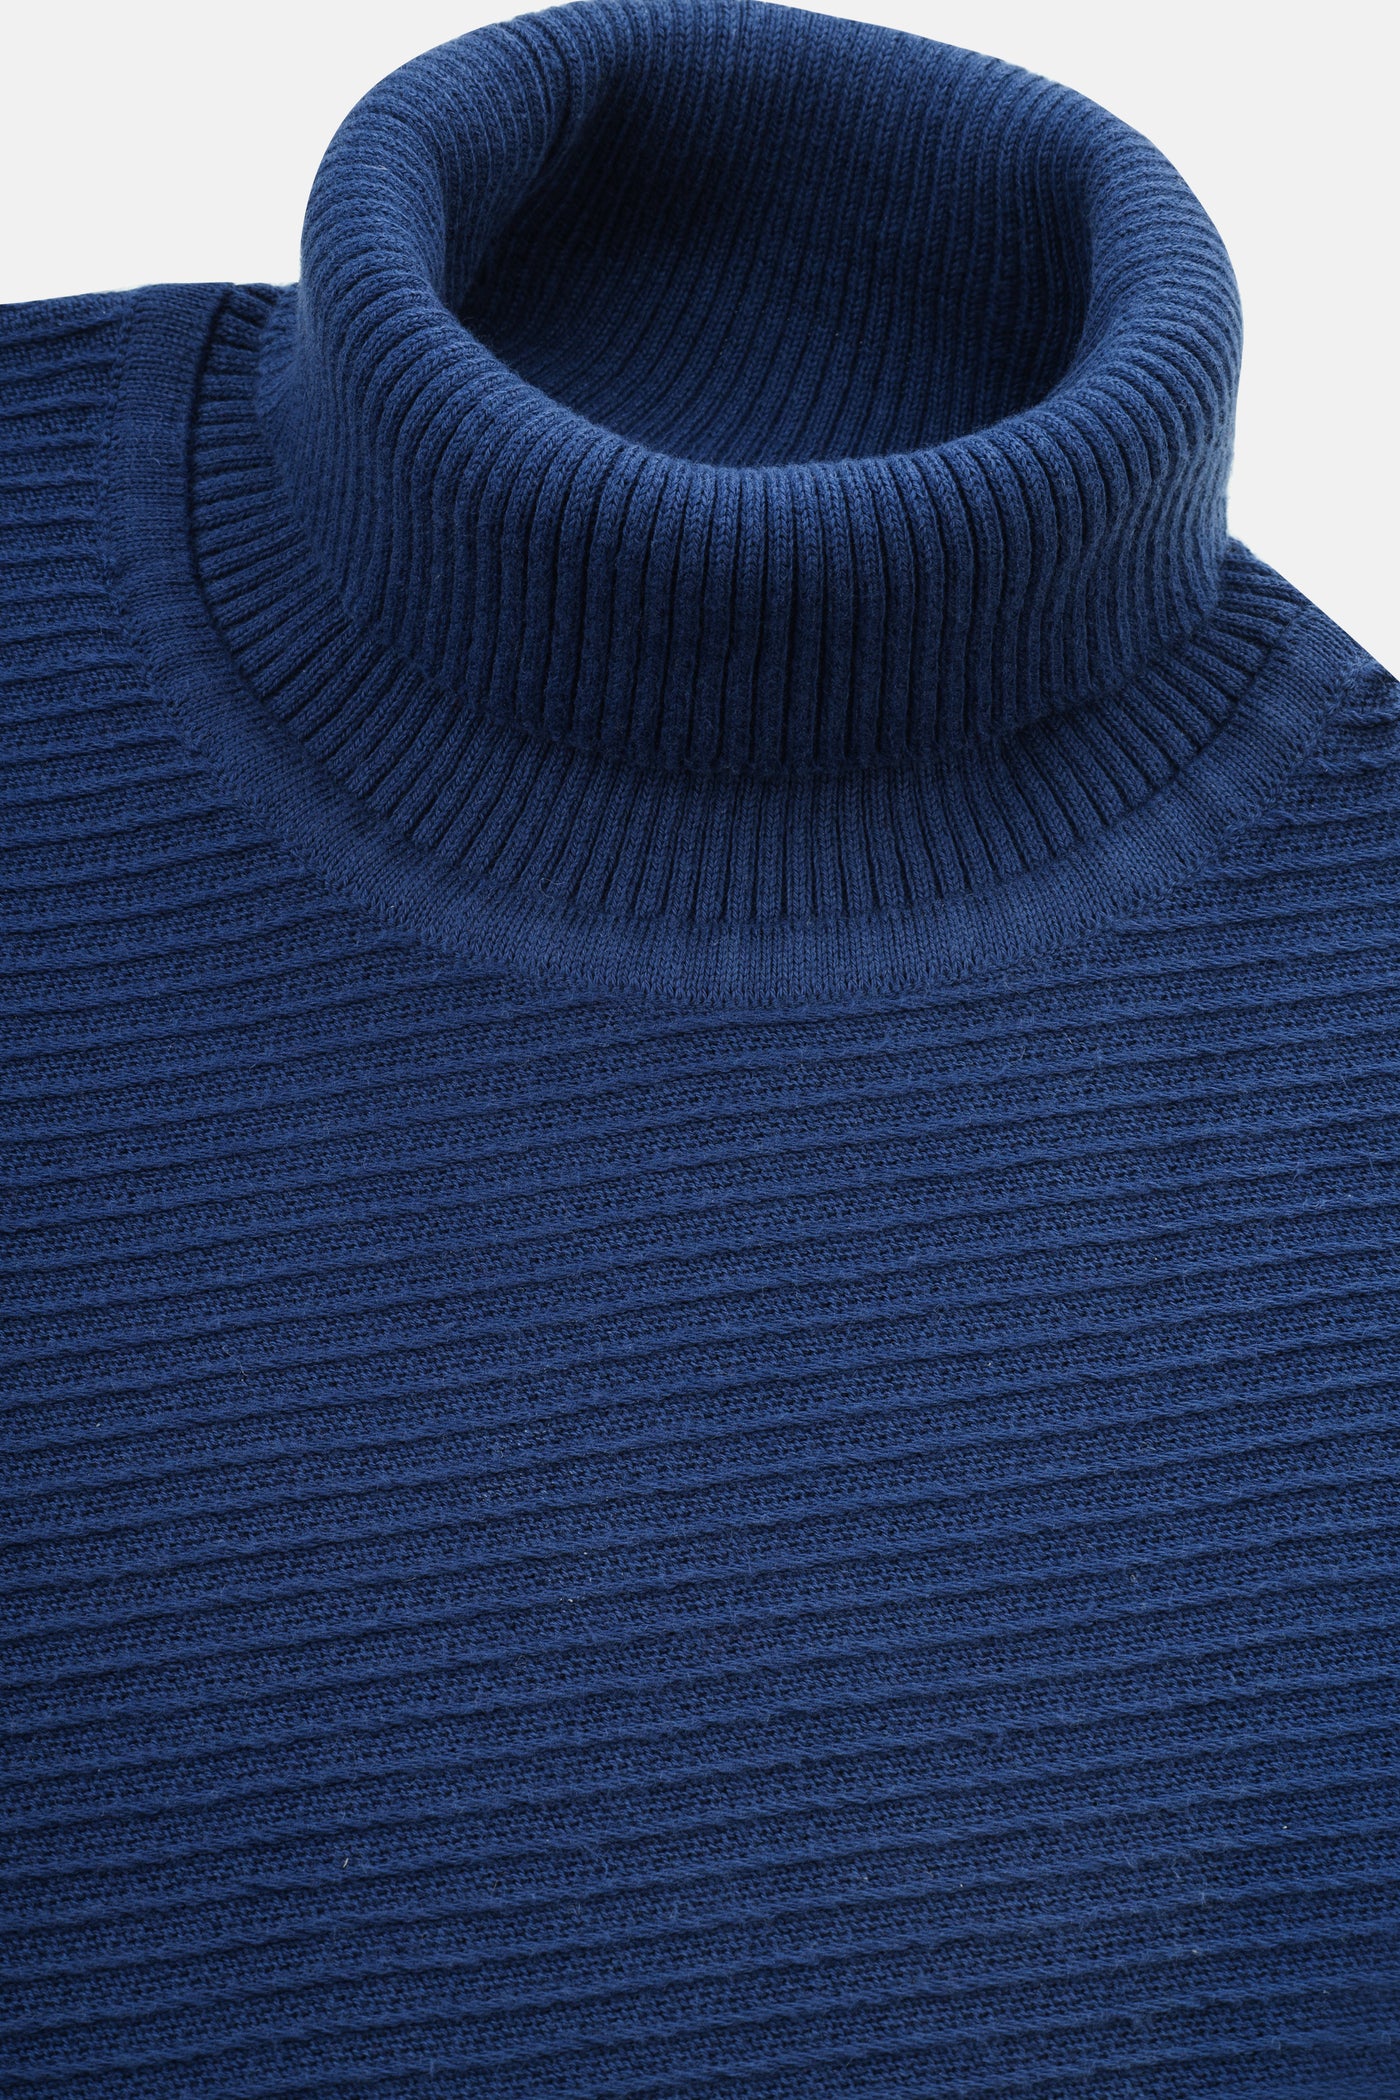 Knitwear Striped Jacquard High-neck Navy Pullover